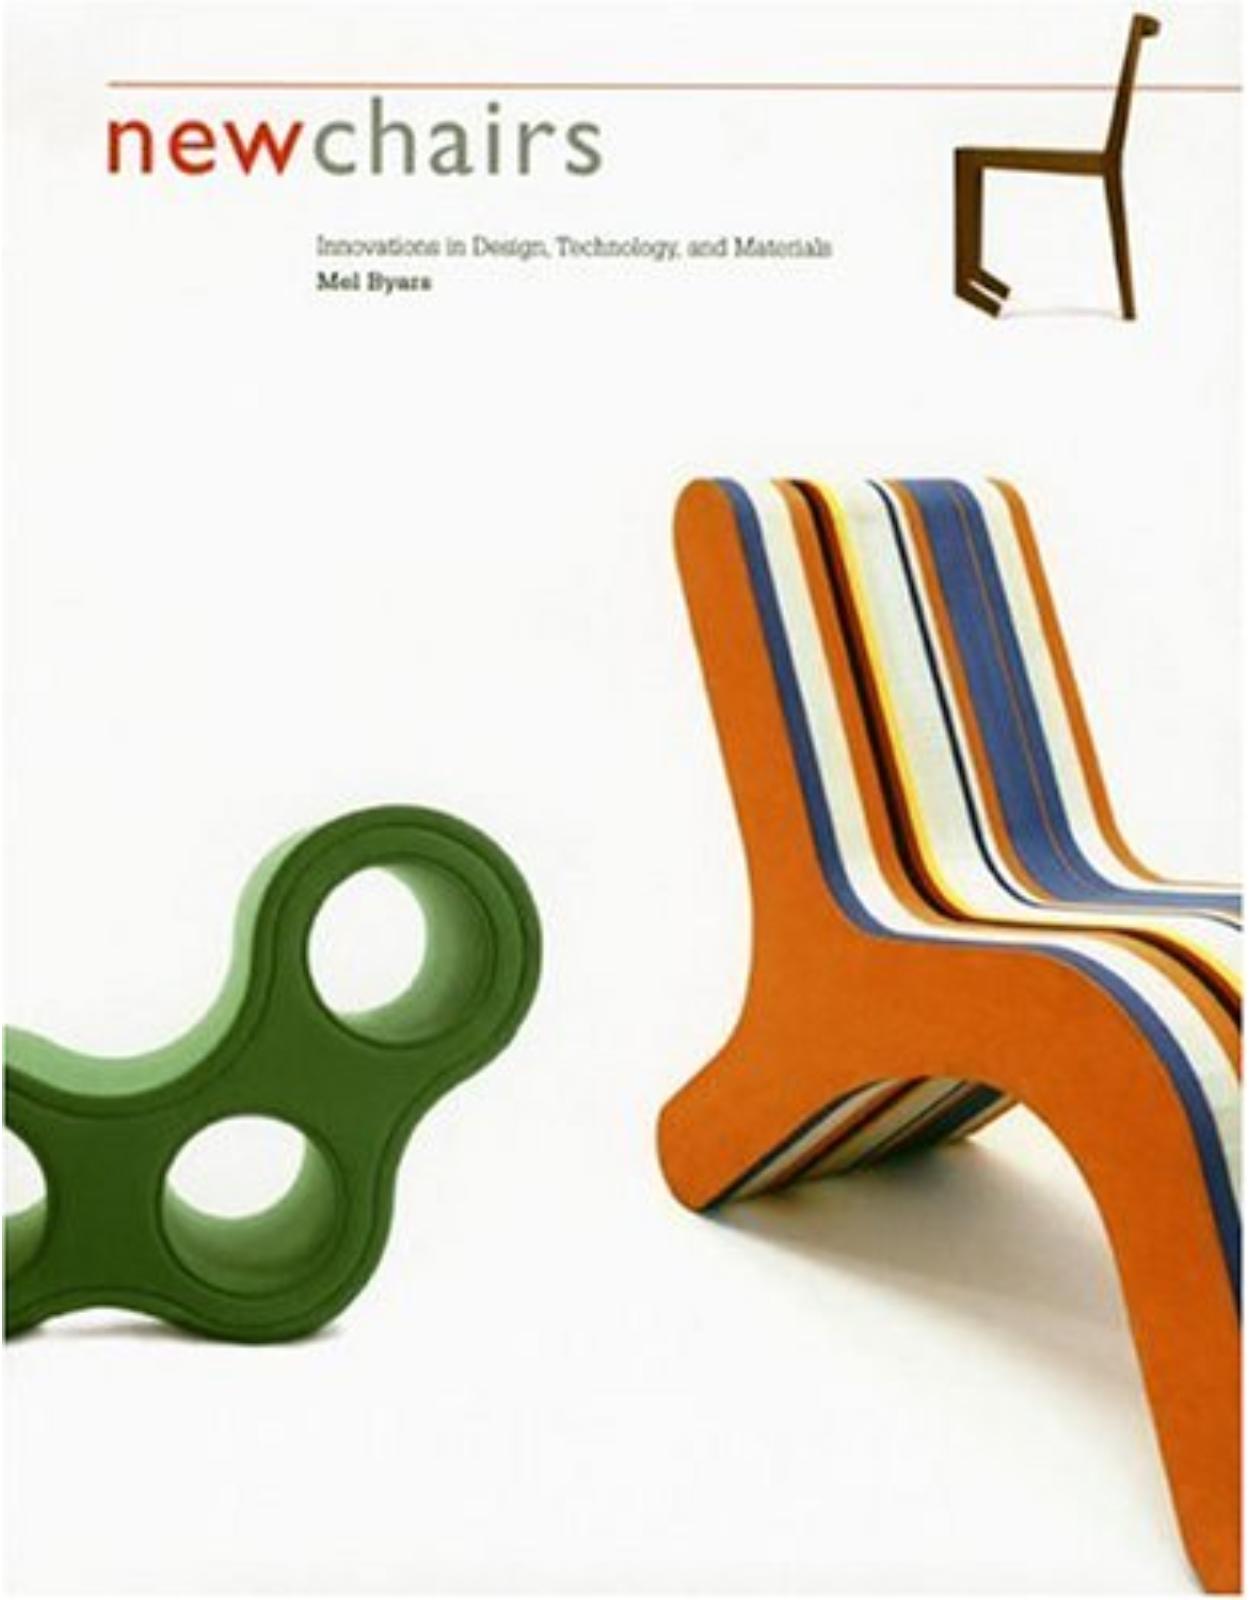 New Chairs: Innovations in Design, Technology, and Materials 